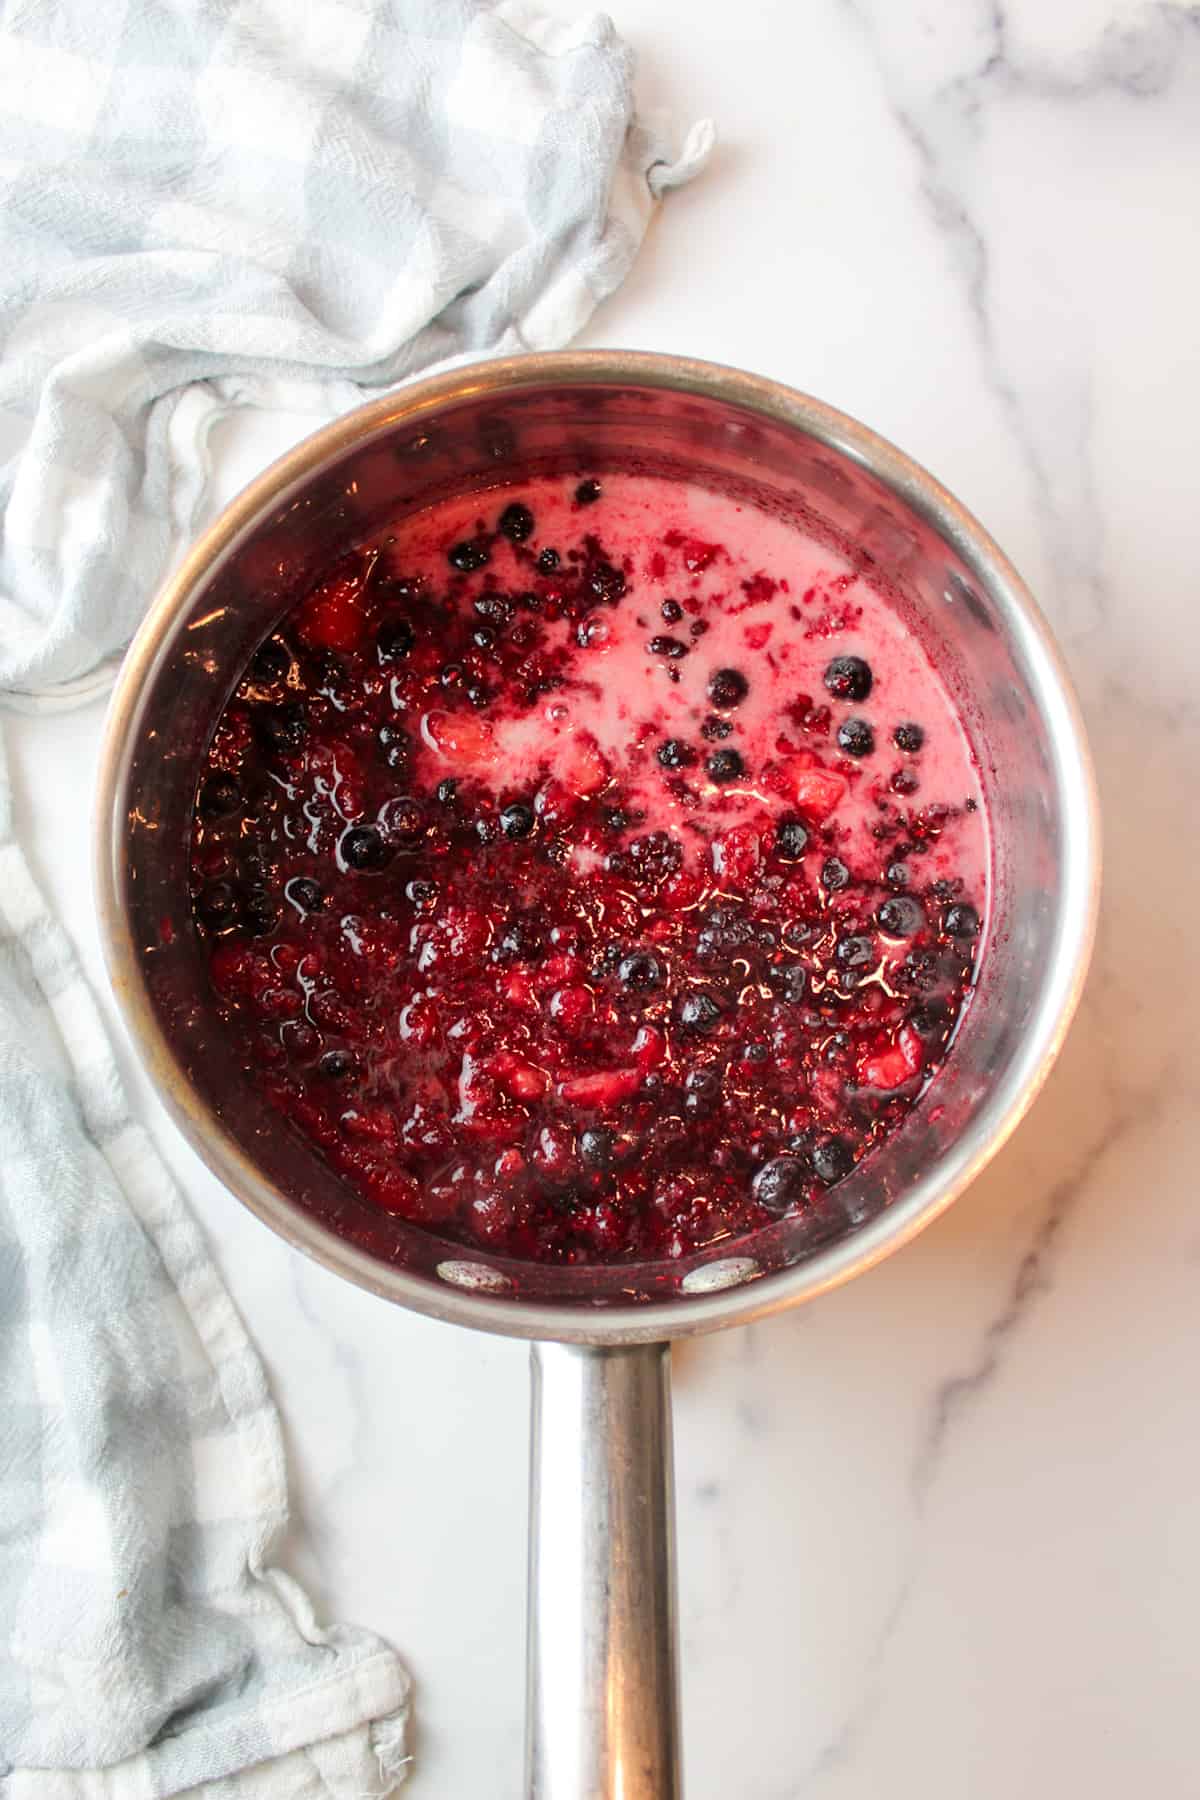 cornstarch slurry in a pan with mashed cooked berries